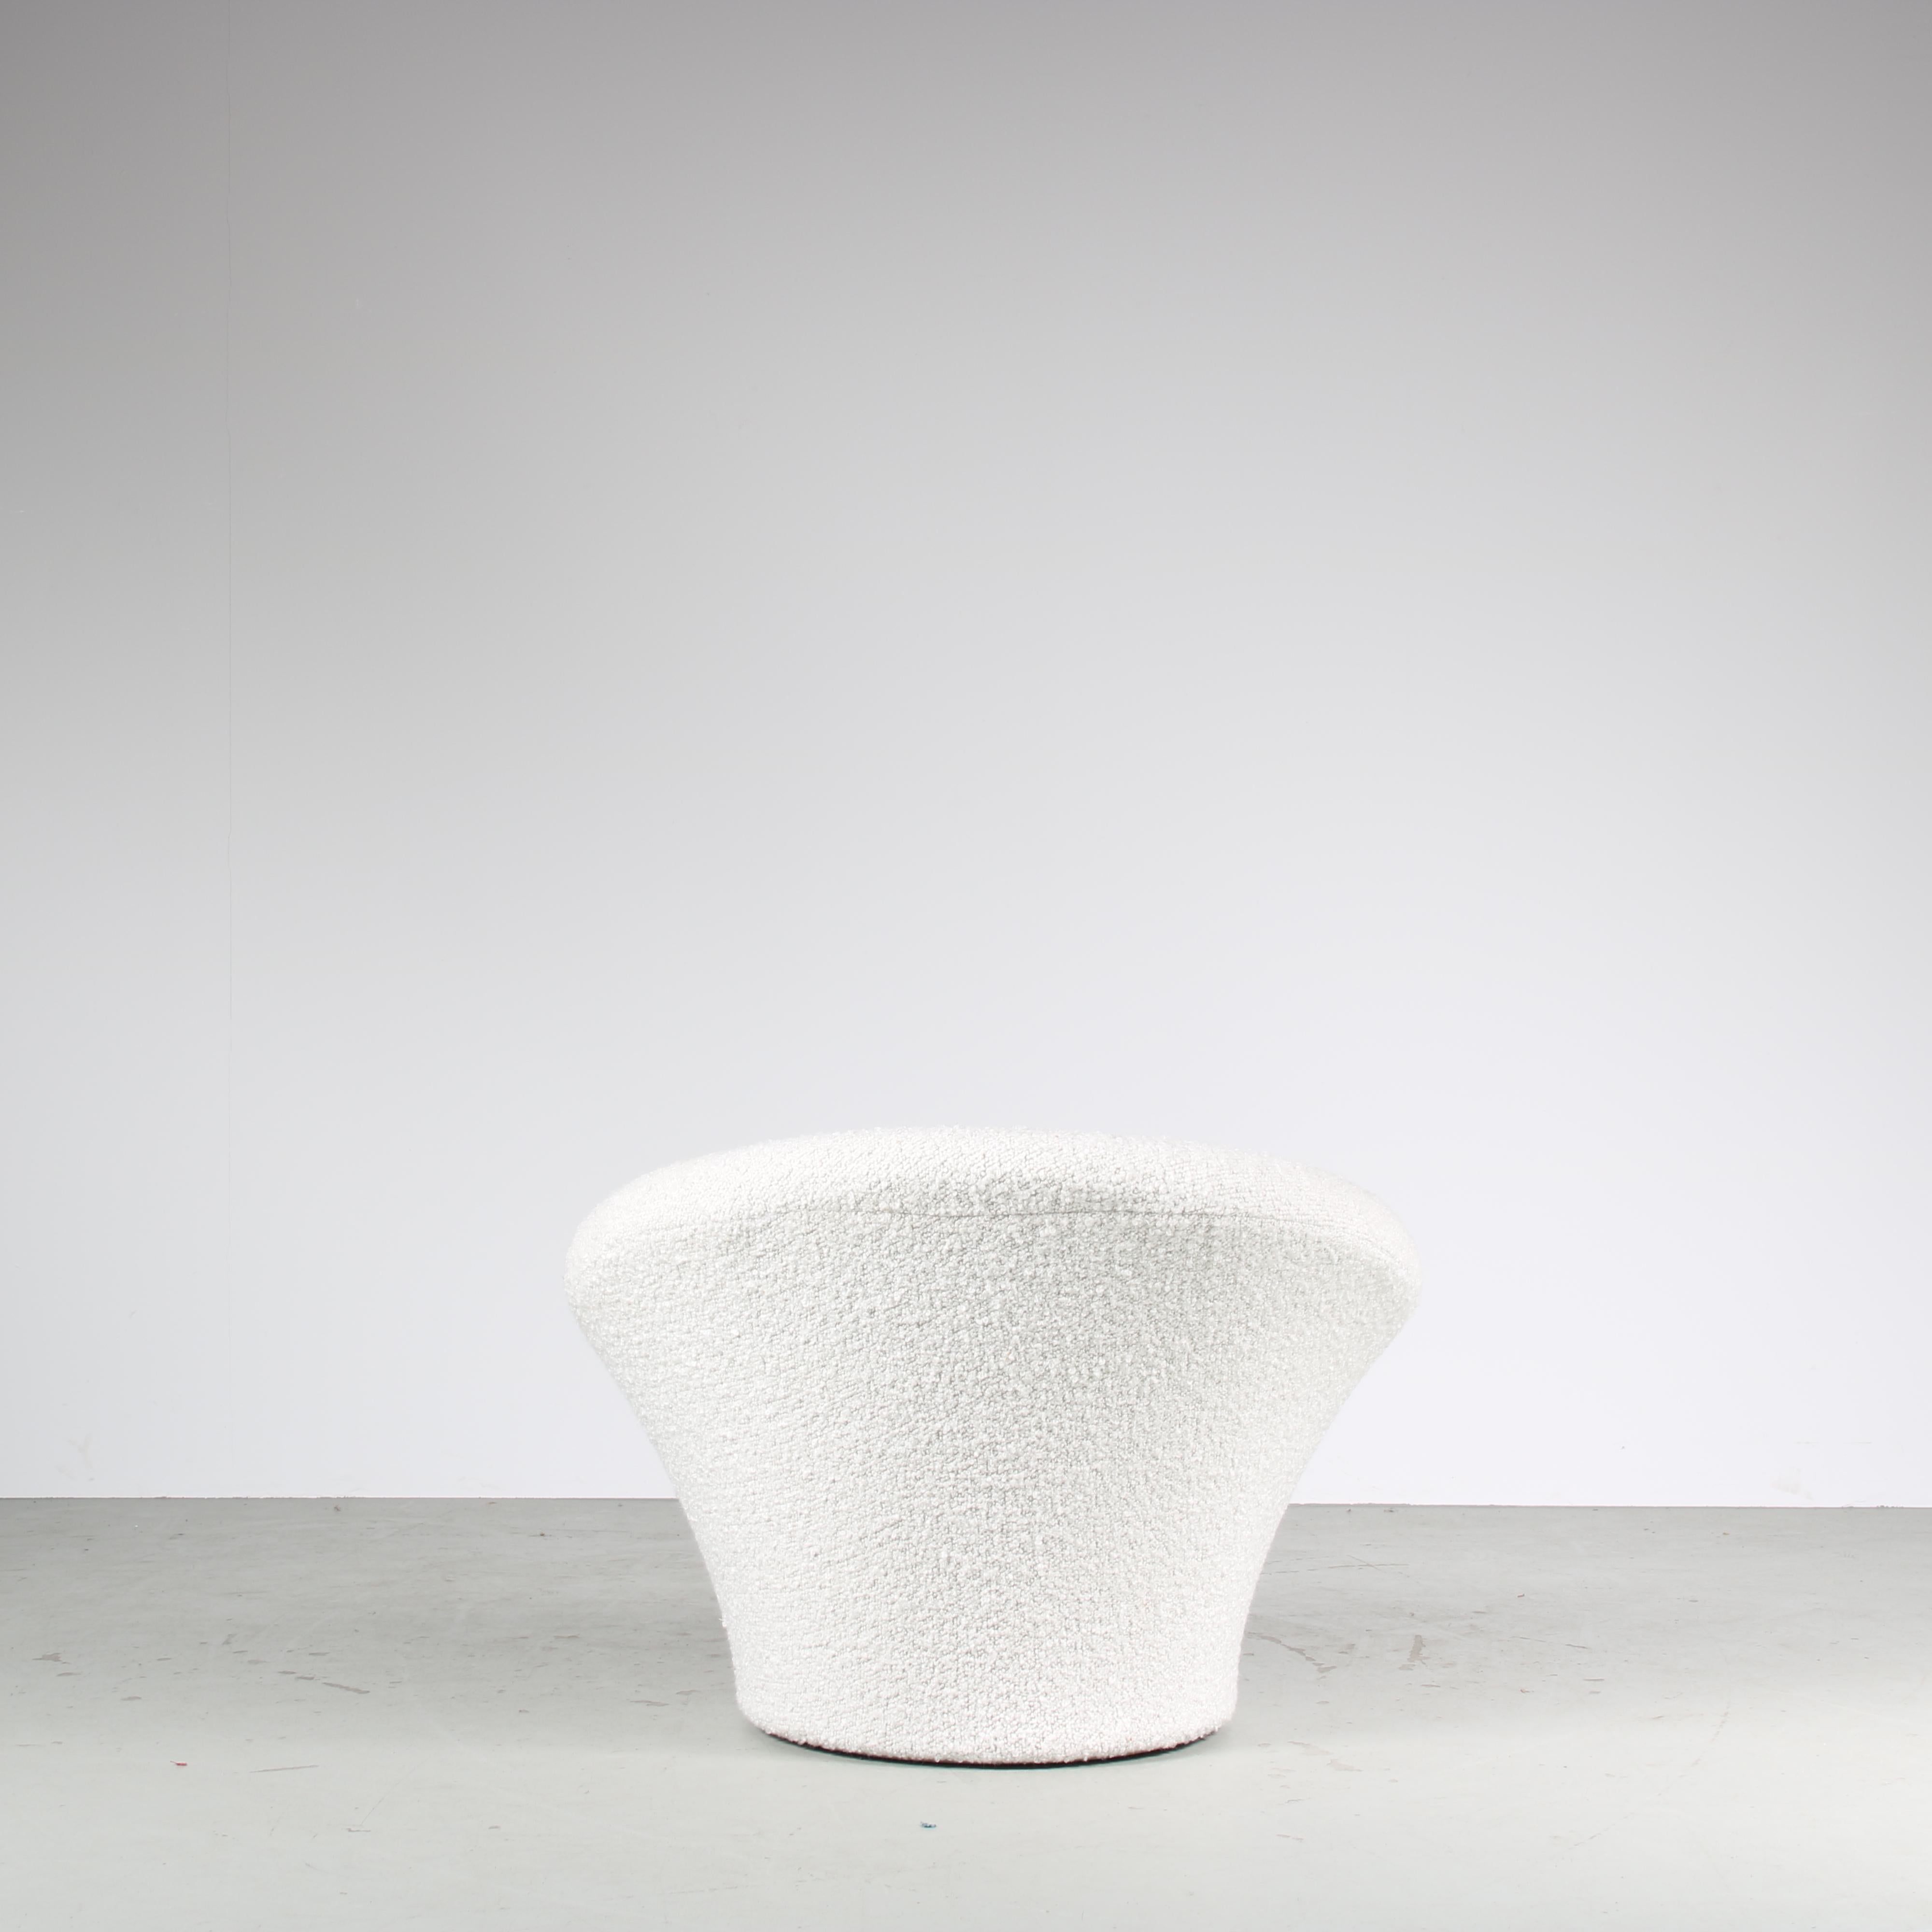 Pierre Paulin “Mushroom” Chair with Stool for Artifort, Netherlands 1960 For Sale 4